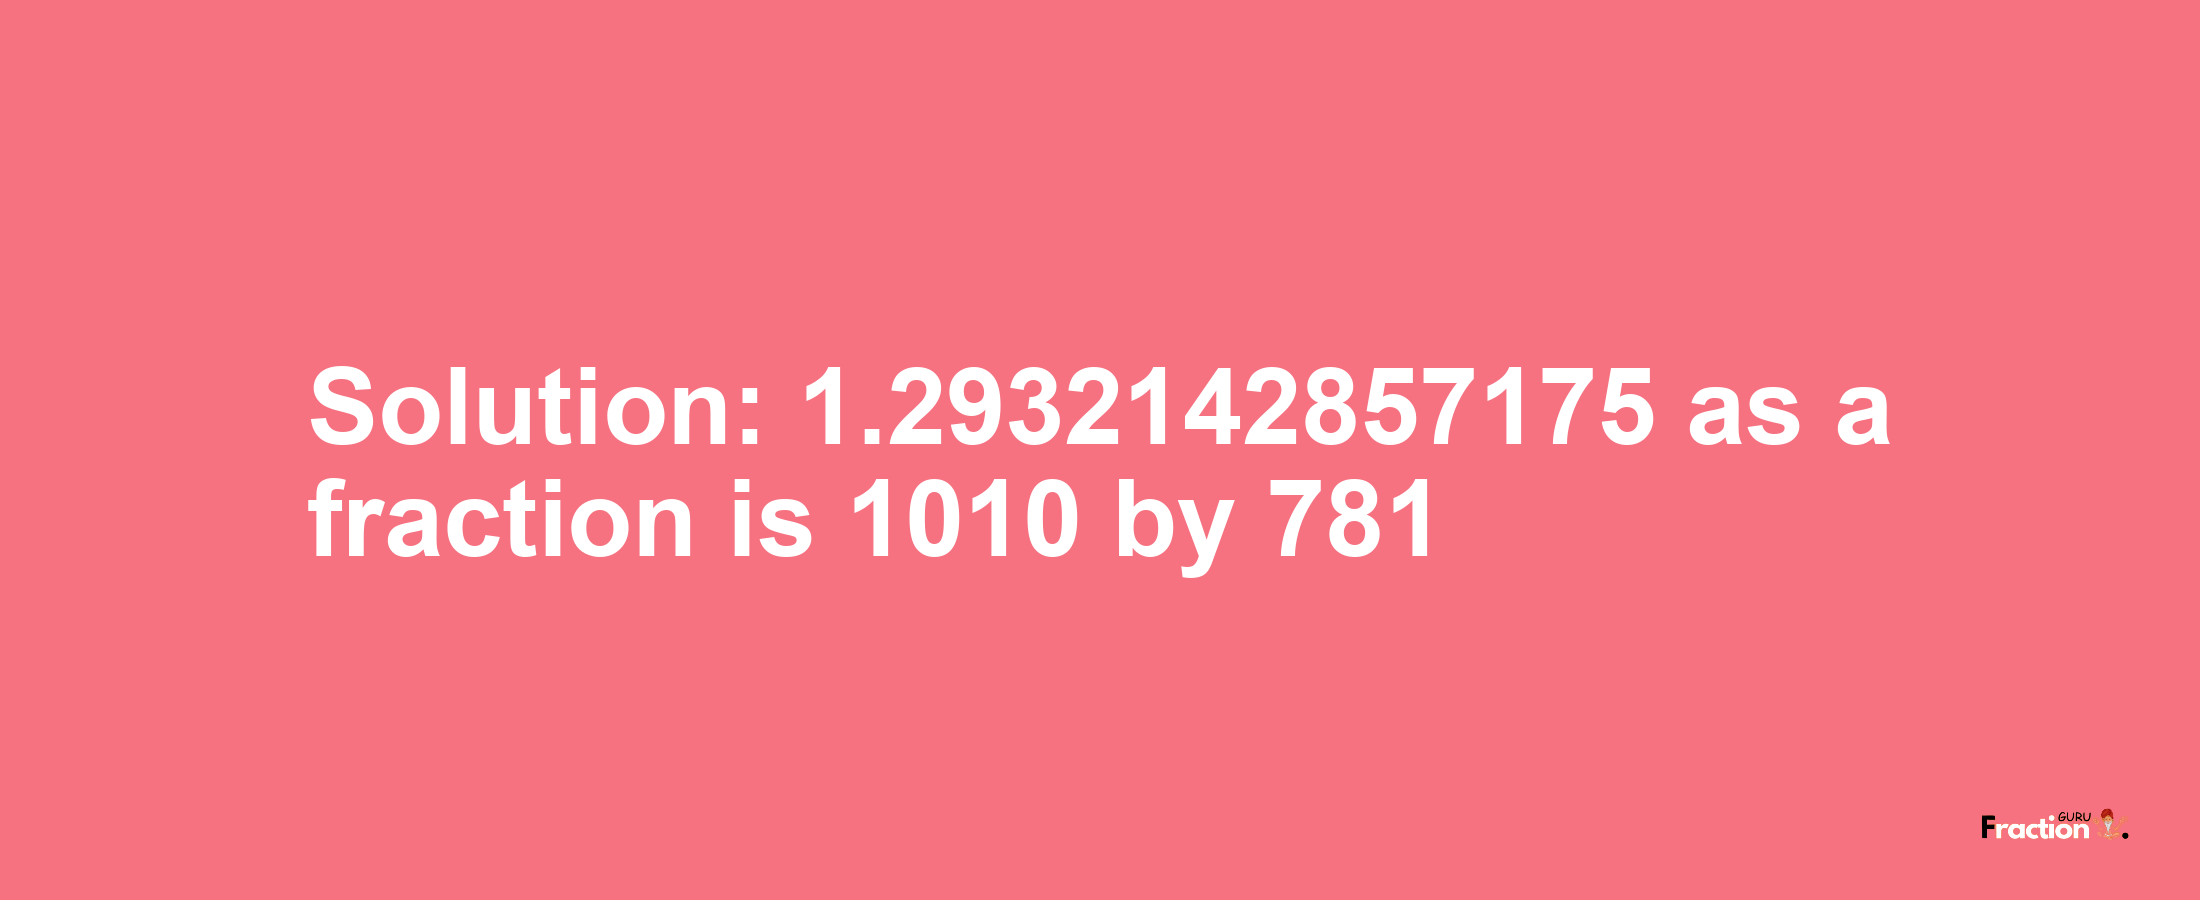 Solution:1.2932142857175 as a fraction is 1010/781